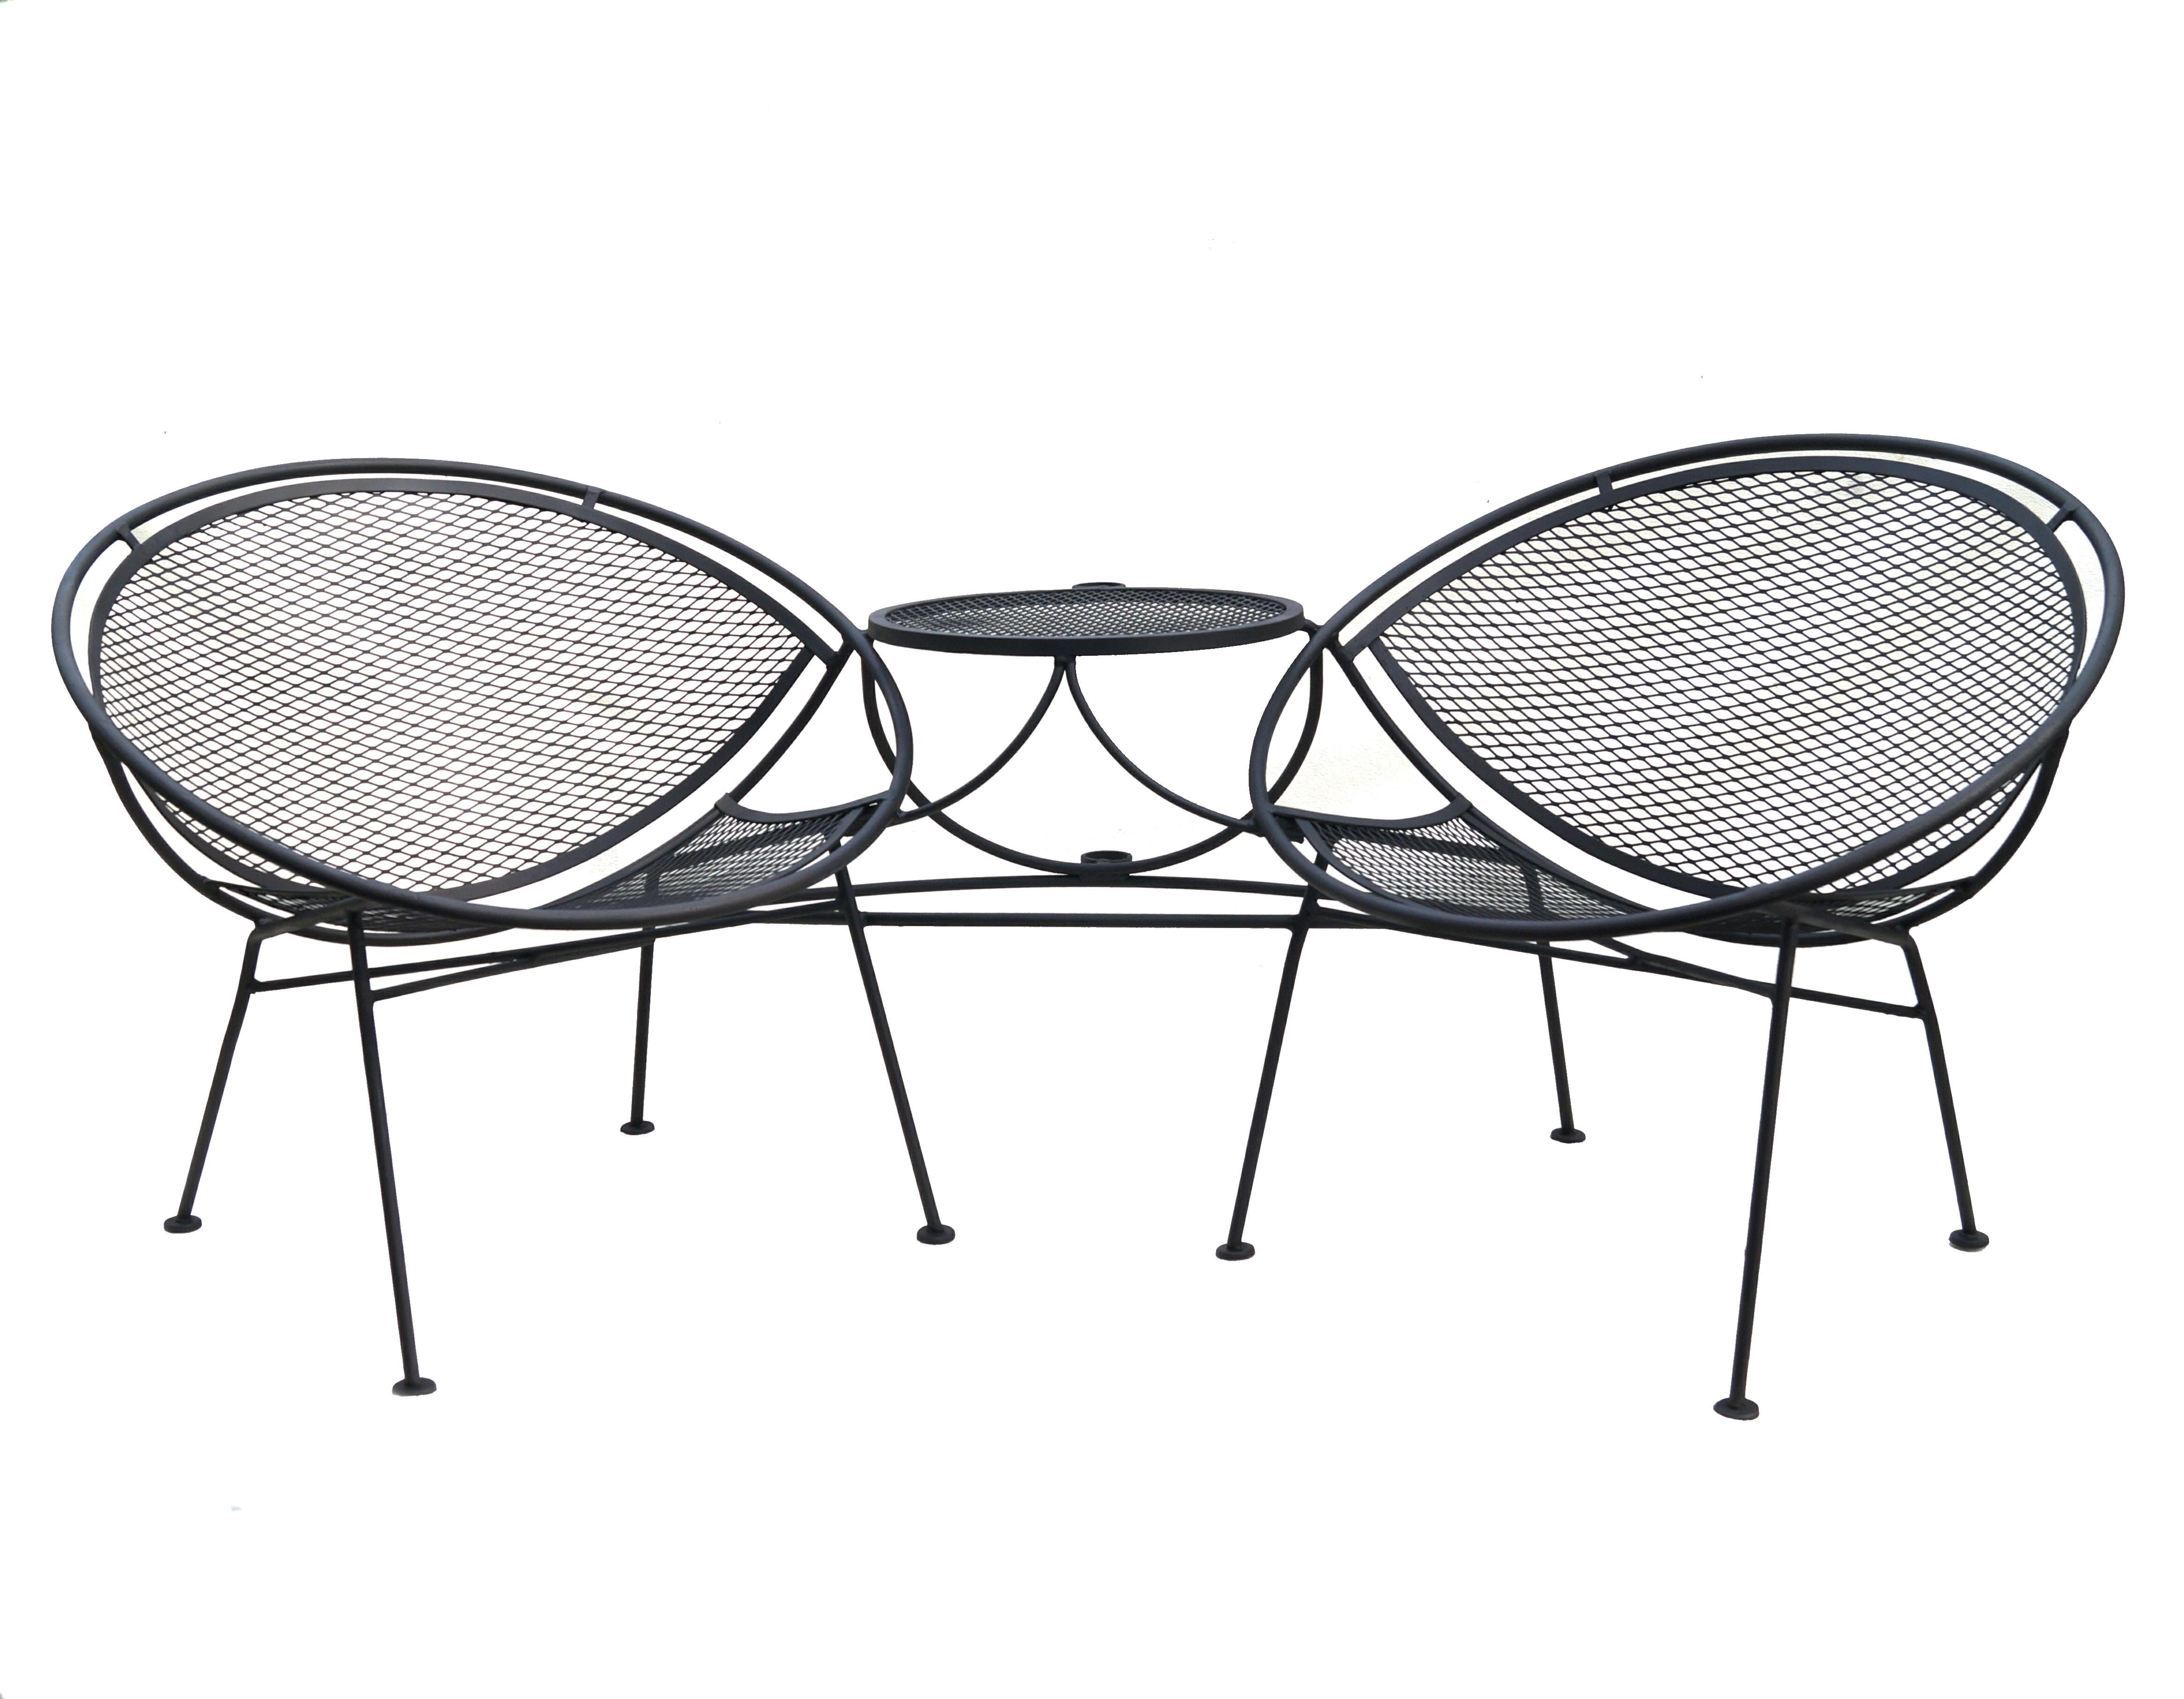 John Salterini Tete a Tete  which has 2 chairs , table and an umbrella holder , if you want shade .  It is all one piece. For Outdoor , Indoor ,  Patio, Pool .  We also have the footrest / ottoman in our other items, which you could add on to this.